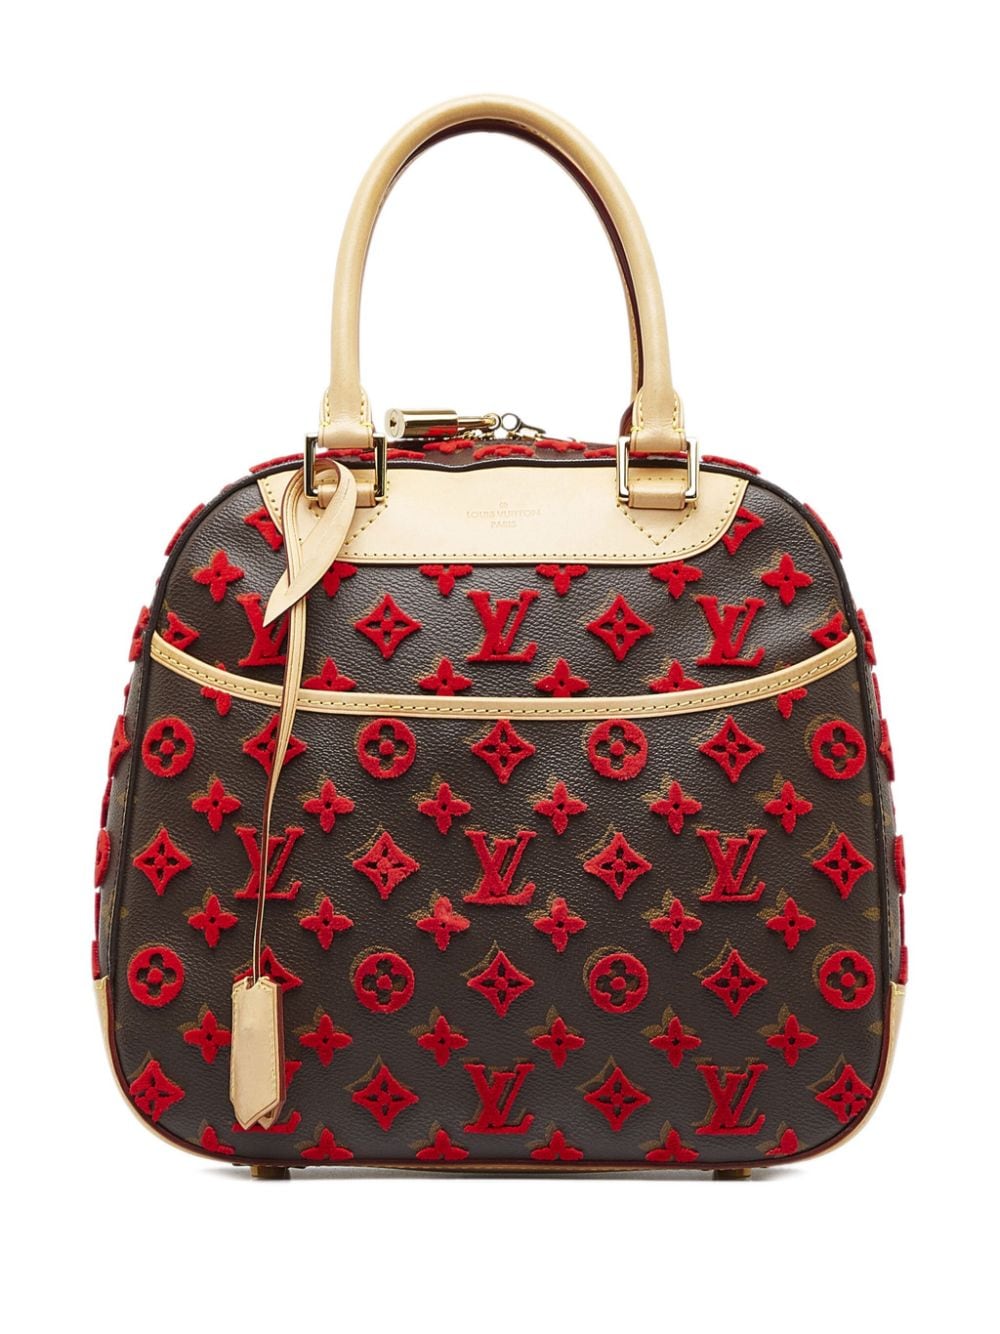 Louis Vuitton Flower Tote Red Canvas Handbag (Pre-Owned)